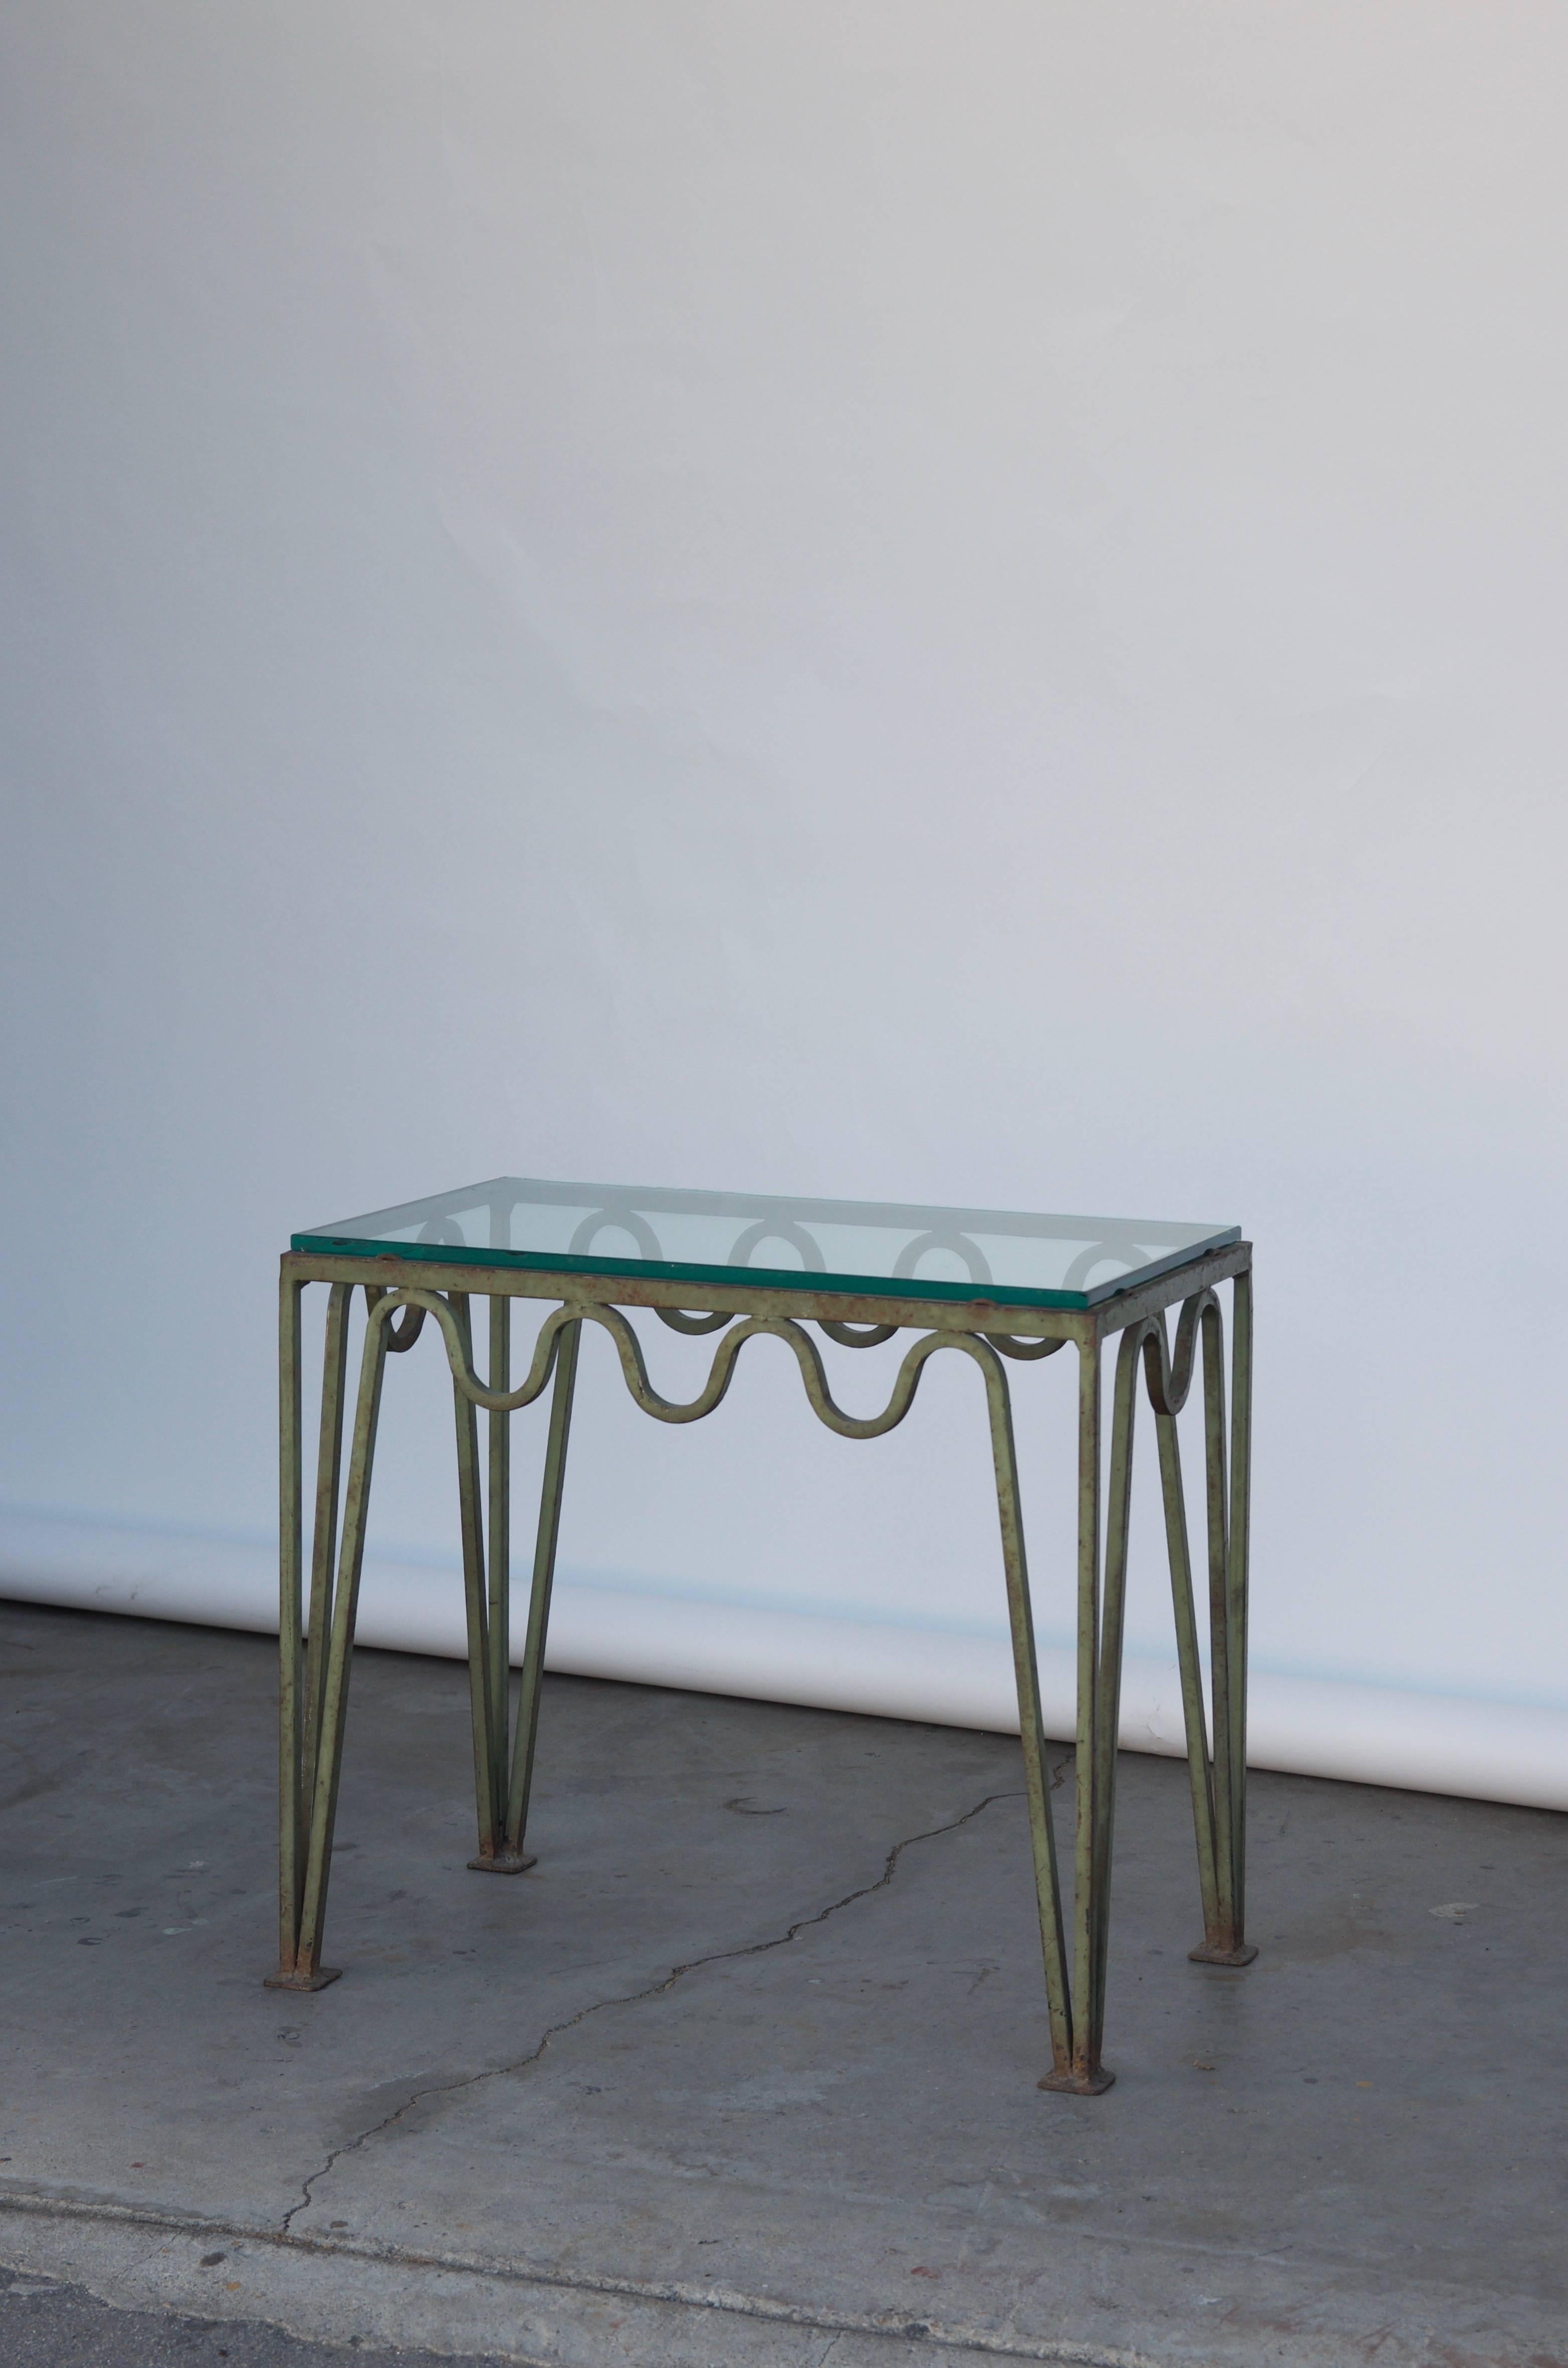 Undulating 'Méandre' verdigris iron and glass side table by Design Frères.

Chic and understated.